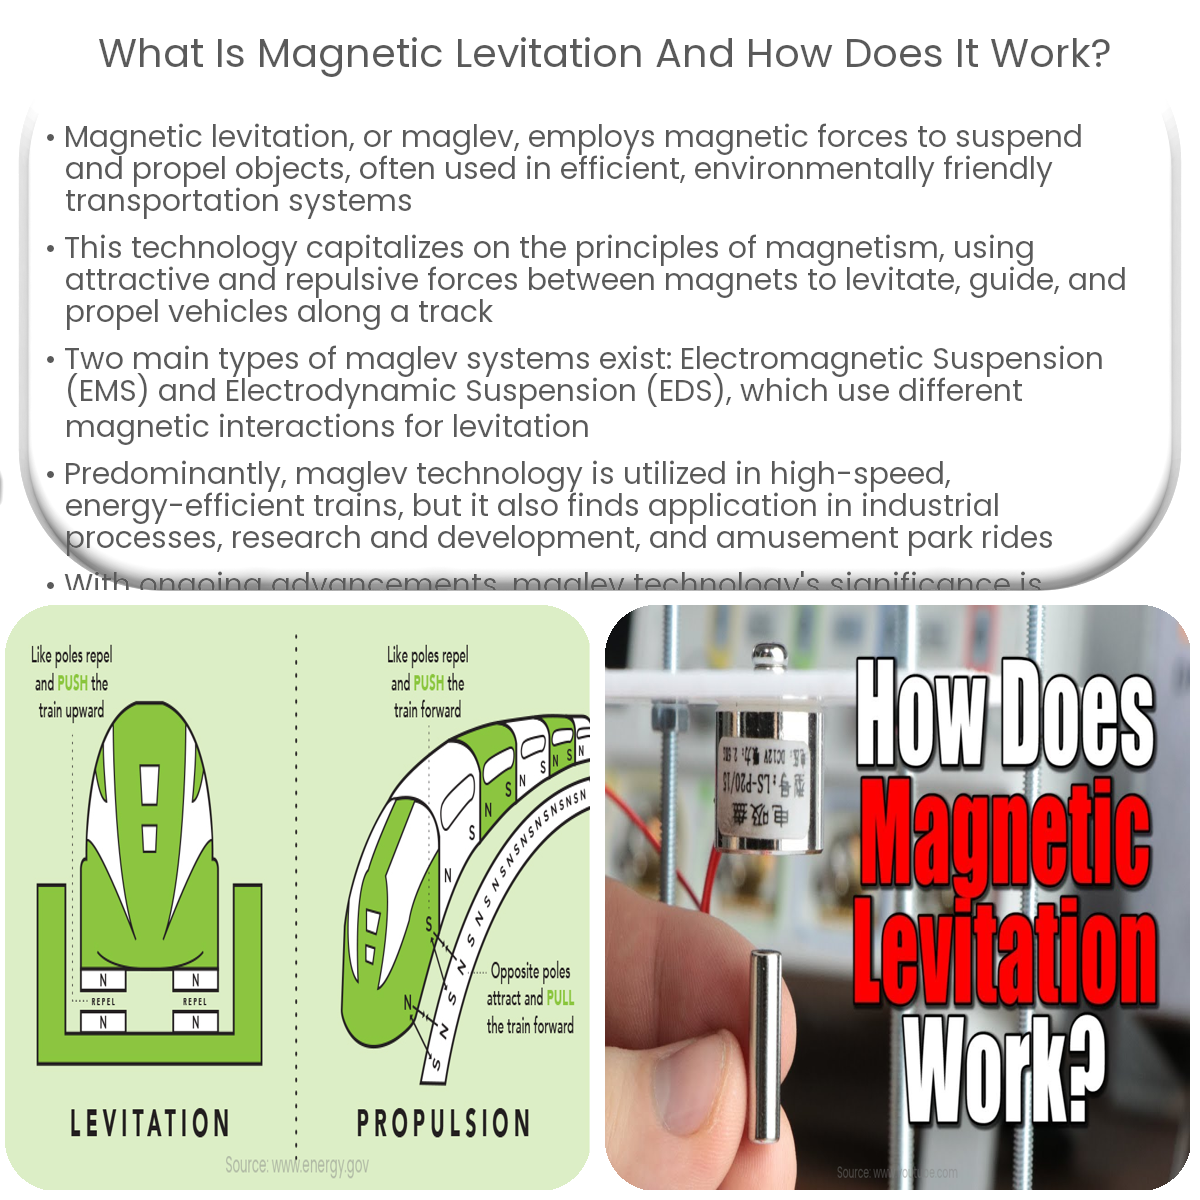 What is magnetic levitation and how does it work?